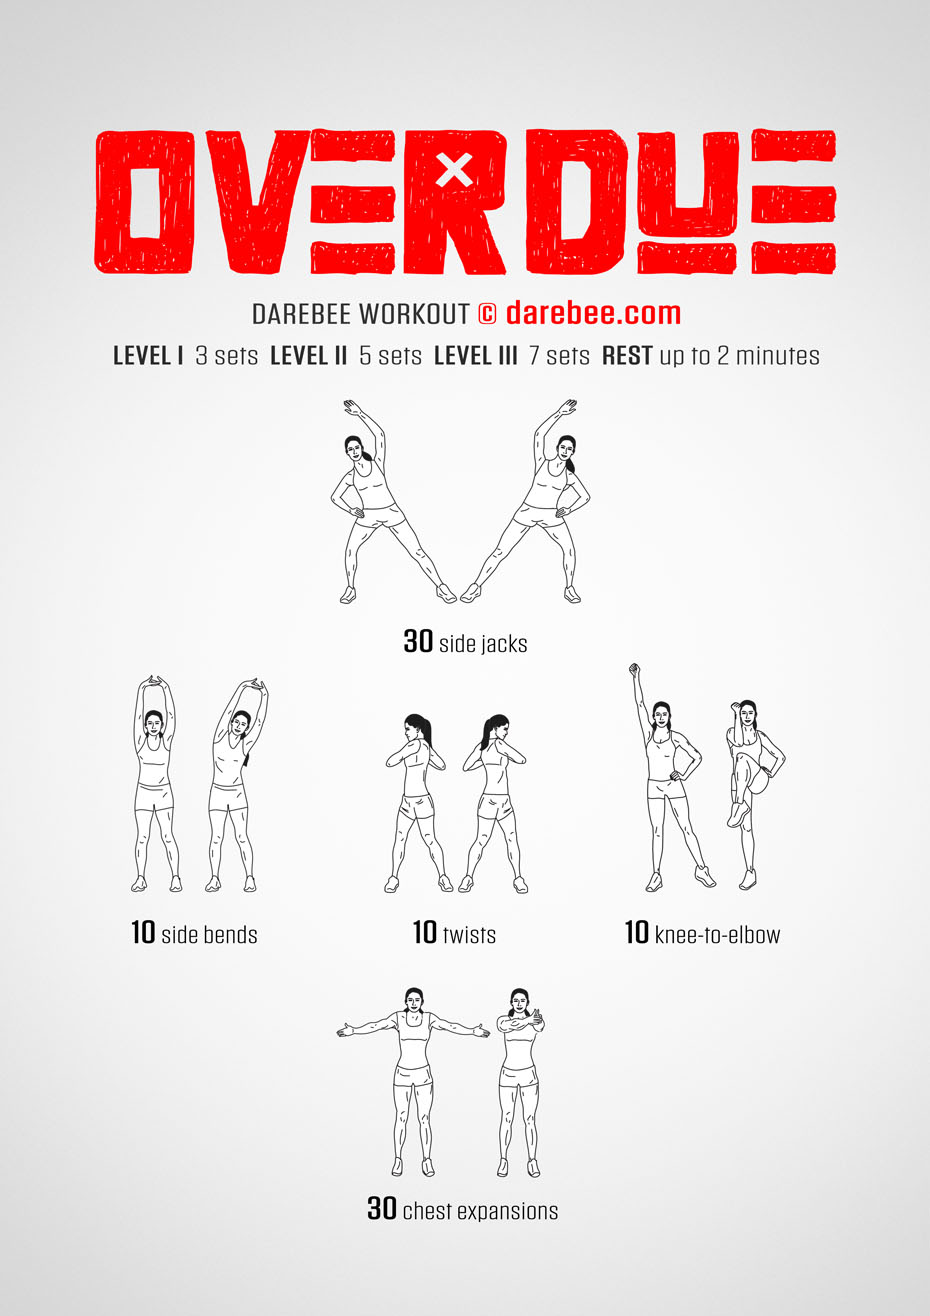 Overdue is a DAREBEE fast-moving, mood-lifting no-equipment aerobic and cardiovascular workout that will not drain your batteries while it helps maintain your fitness.